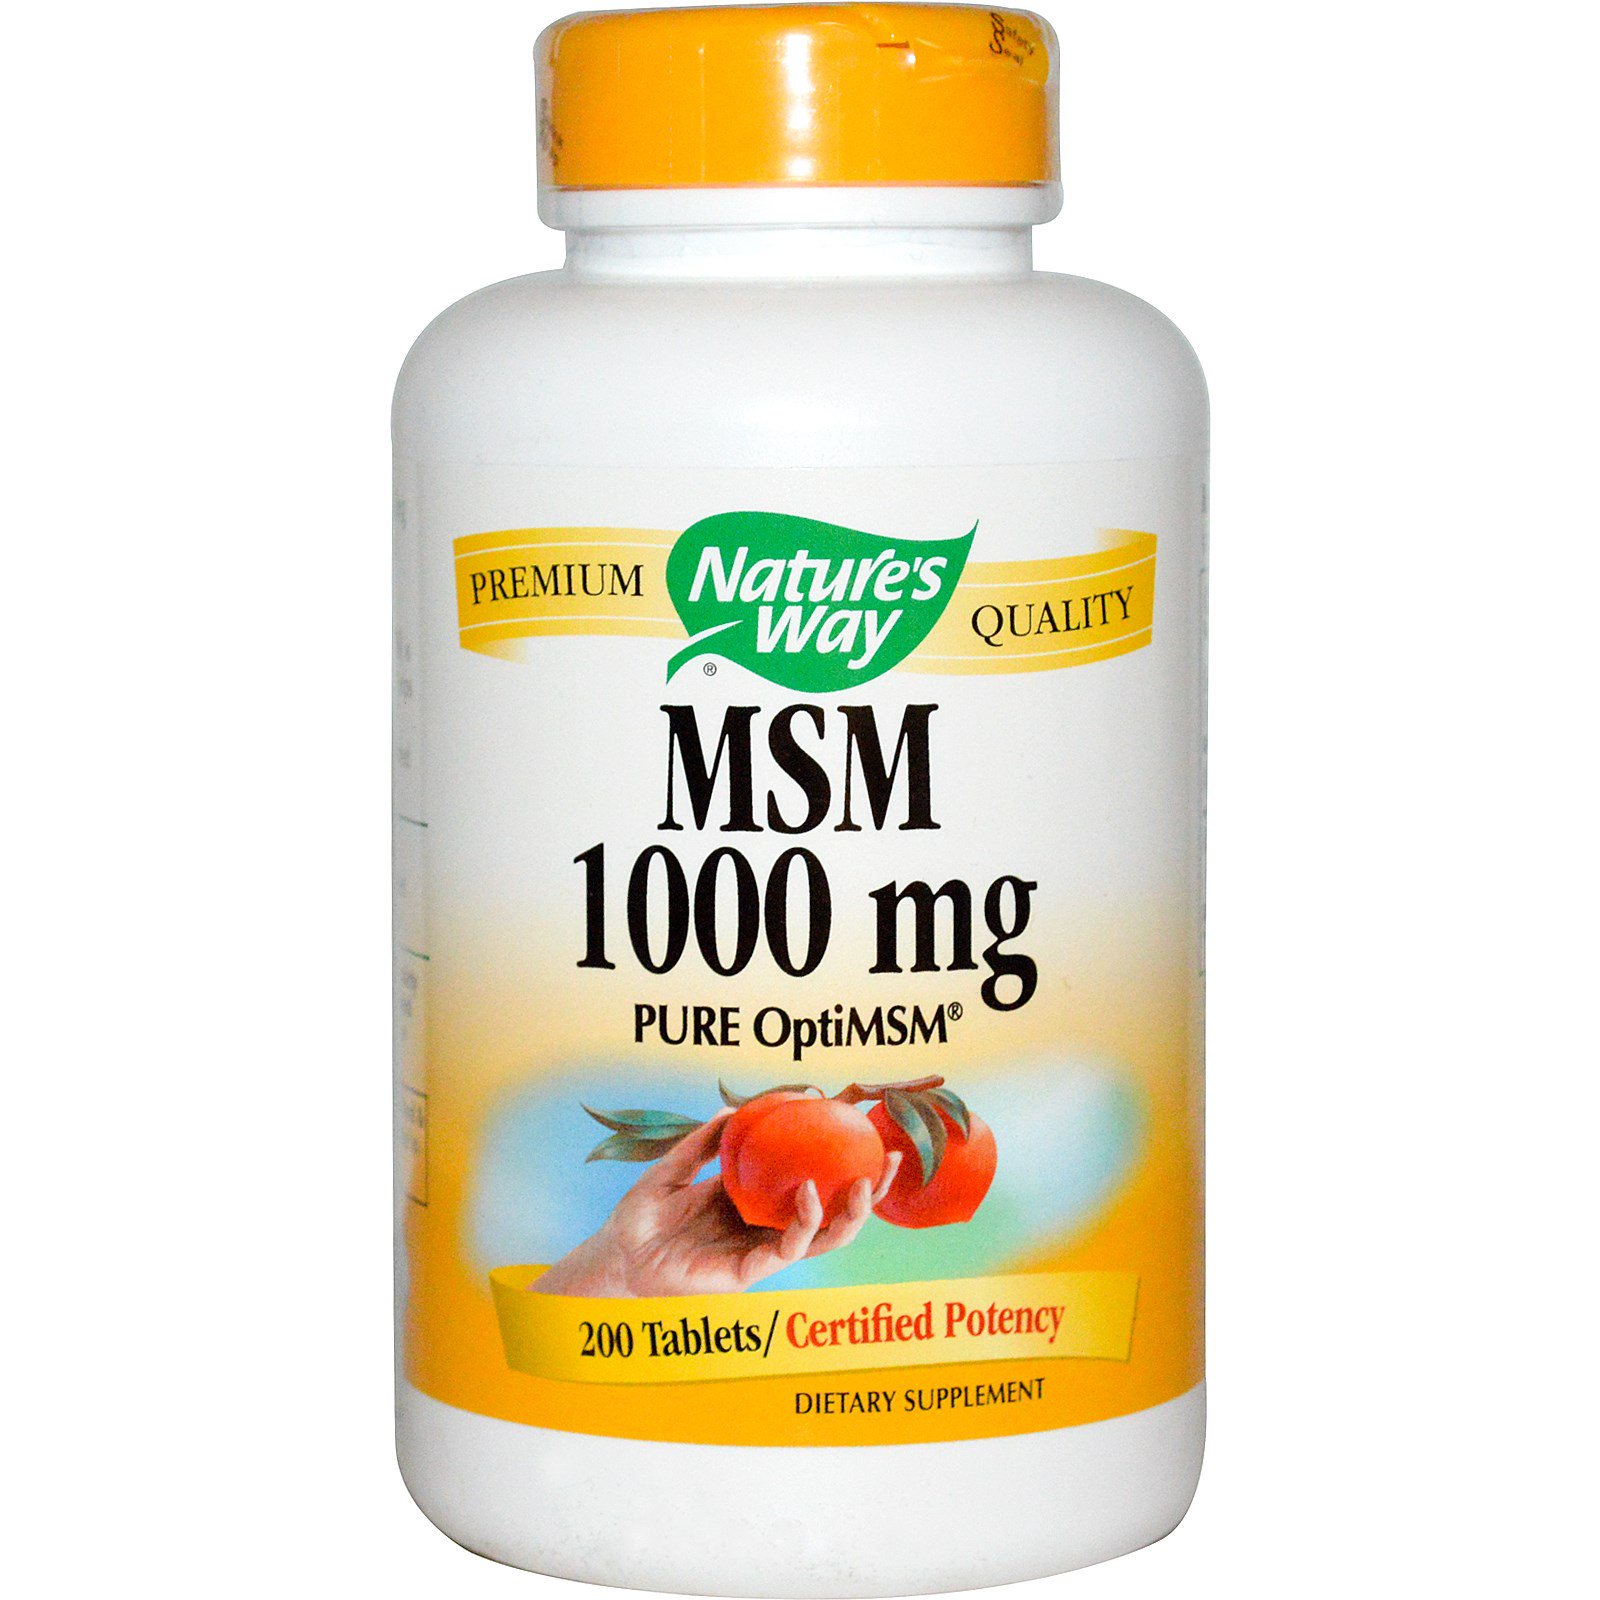 Natures Way Msm Pure Optimsm 1000 Mg 200 Tablets 